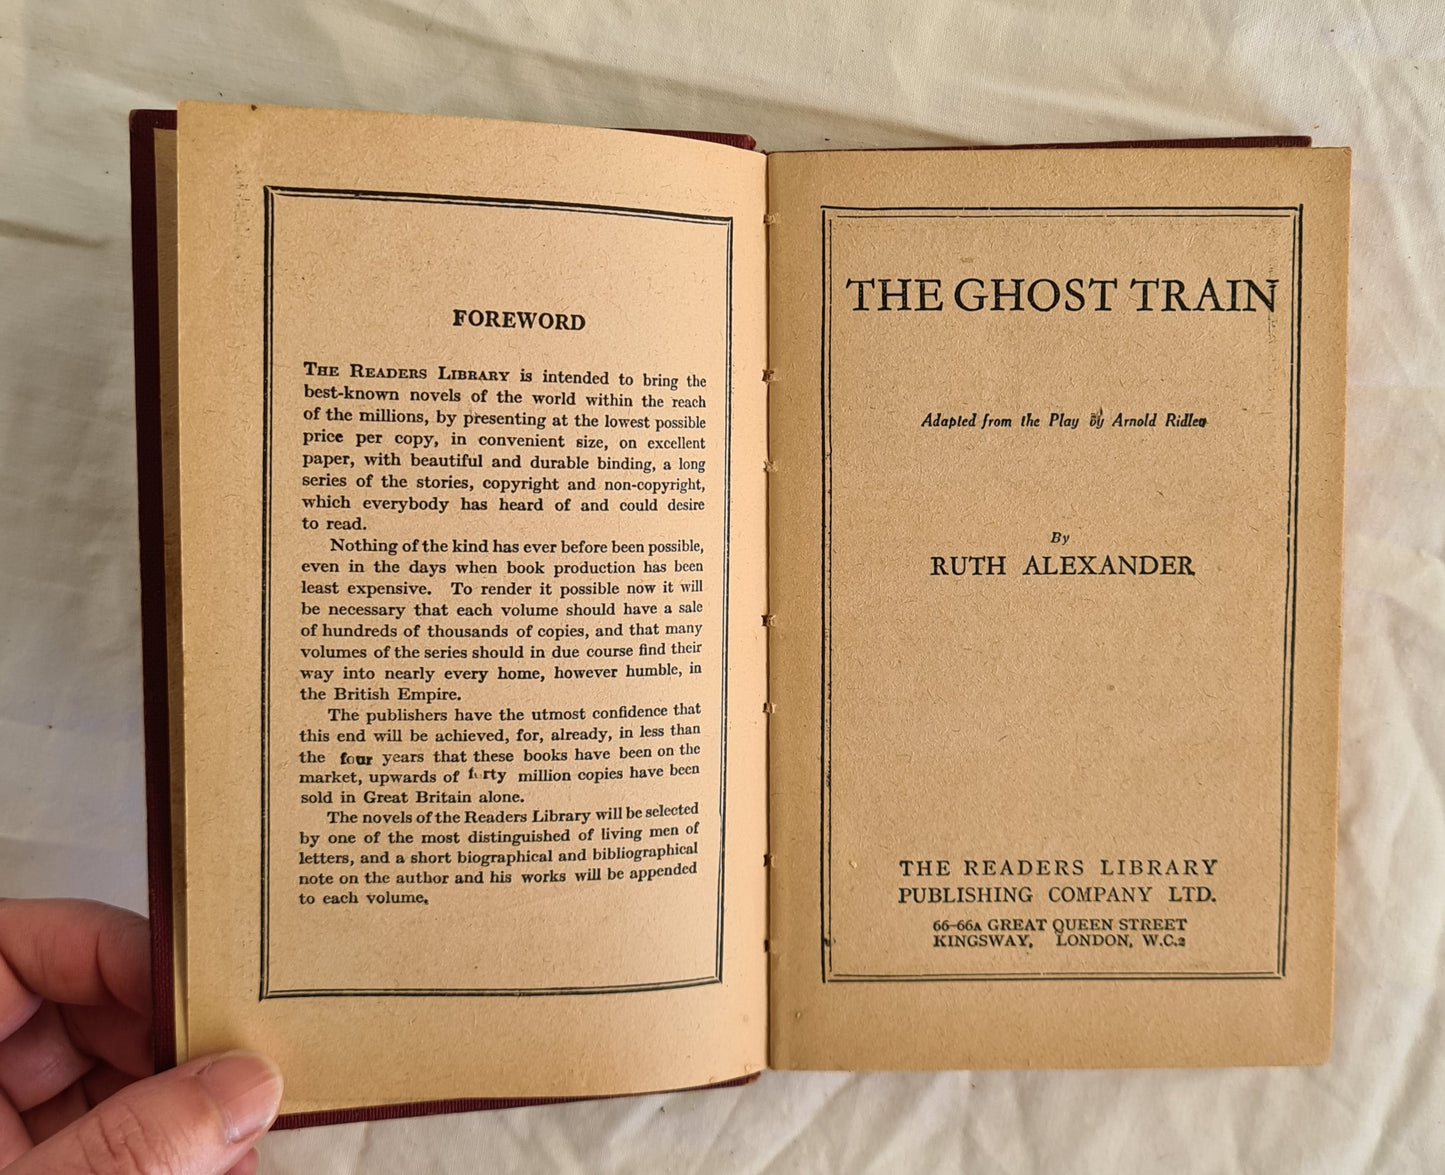 The Ghost Train by Ruth Alexander